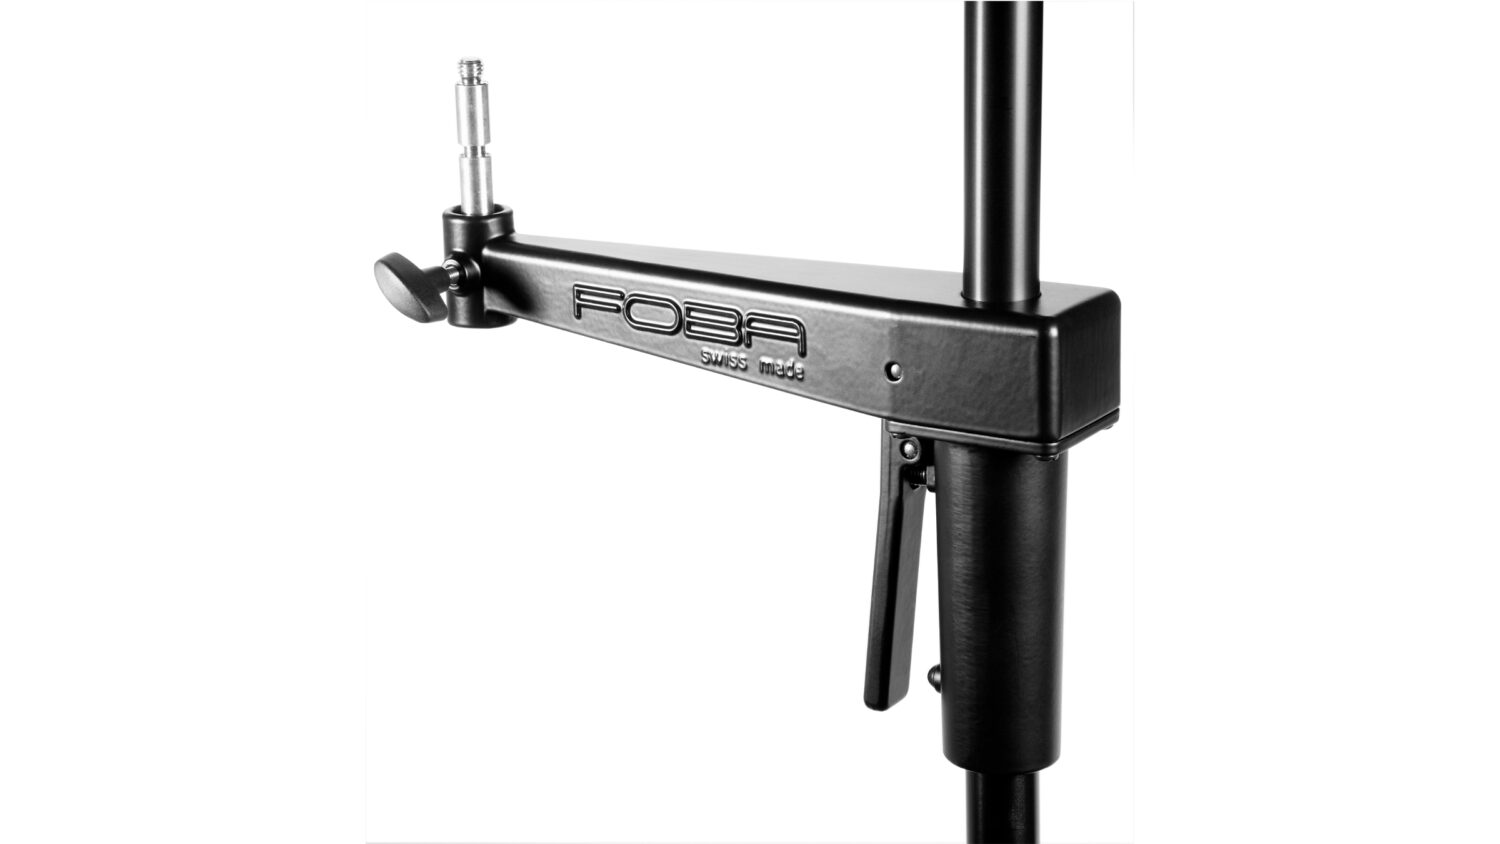 FOBA sliding clamp with trigger on combitube and adapter for BRONCOLOR lamps